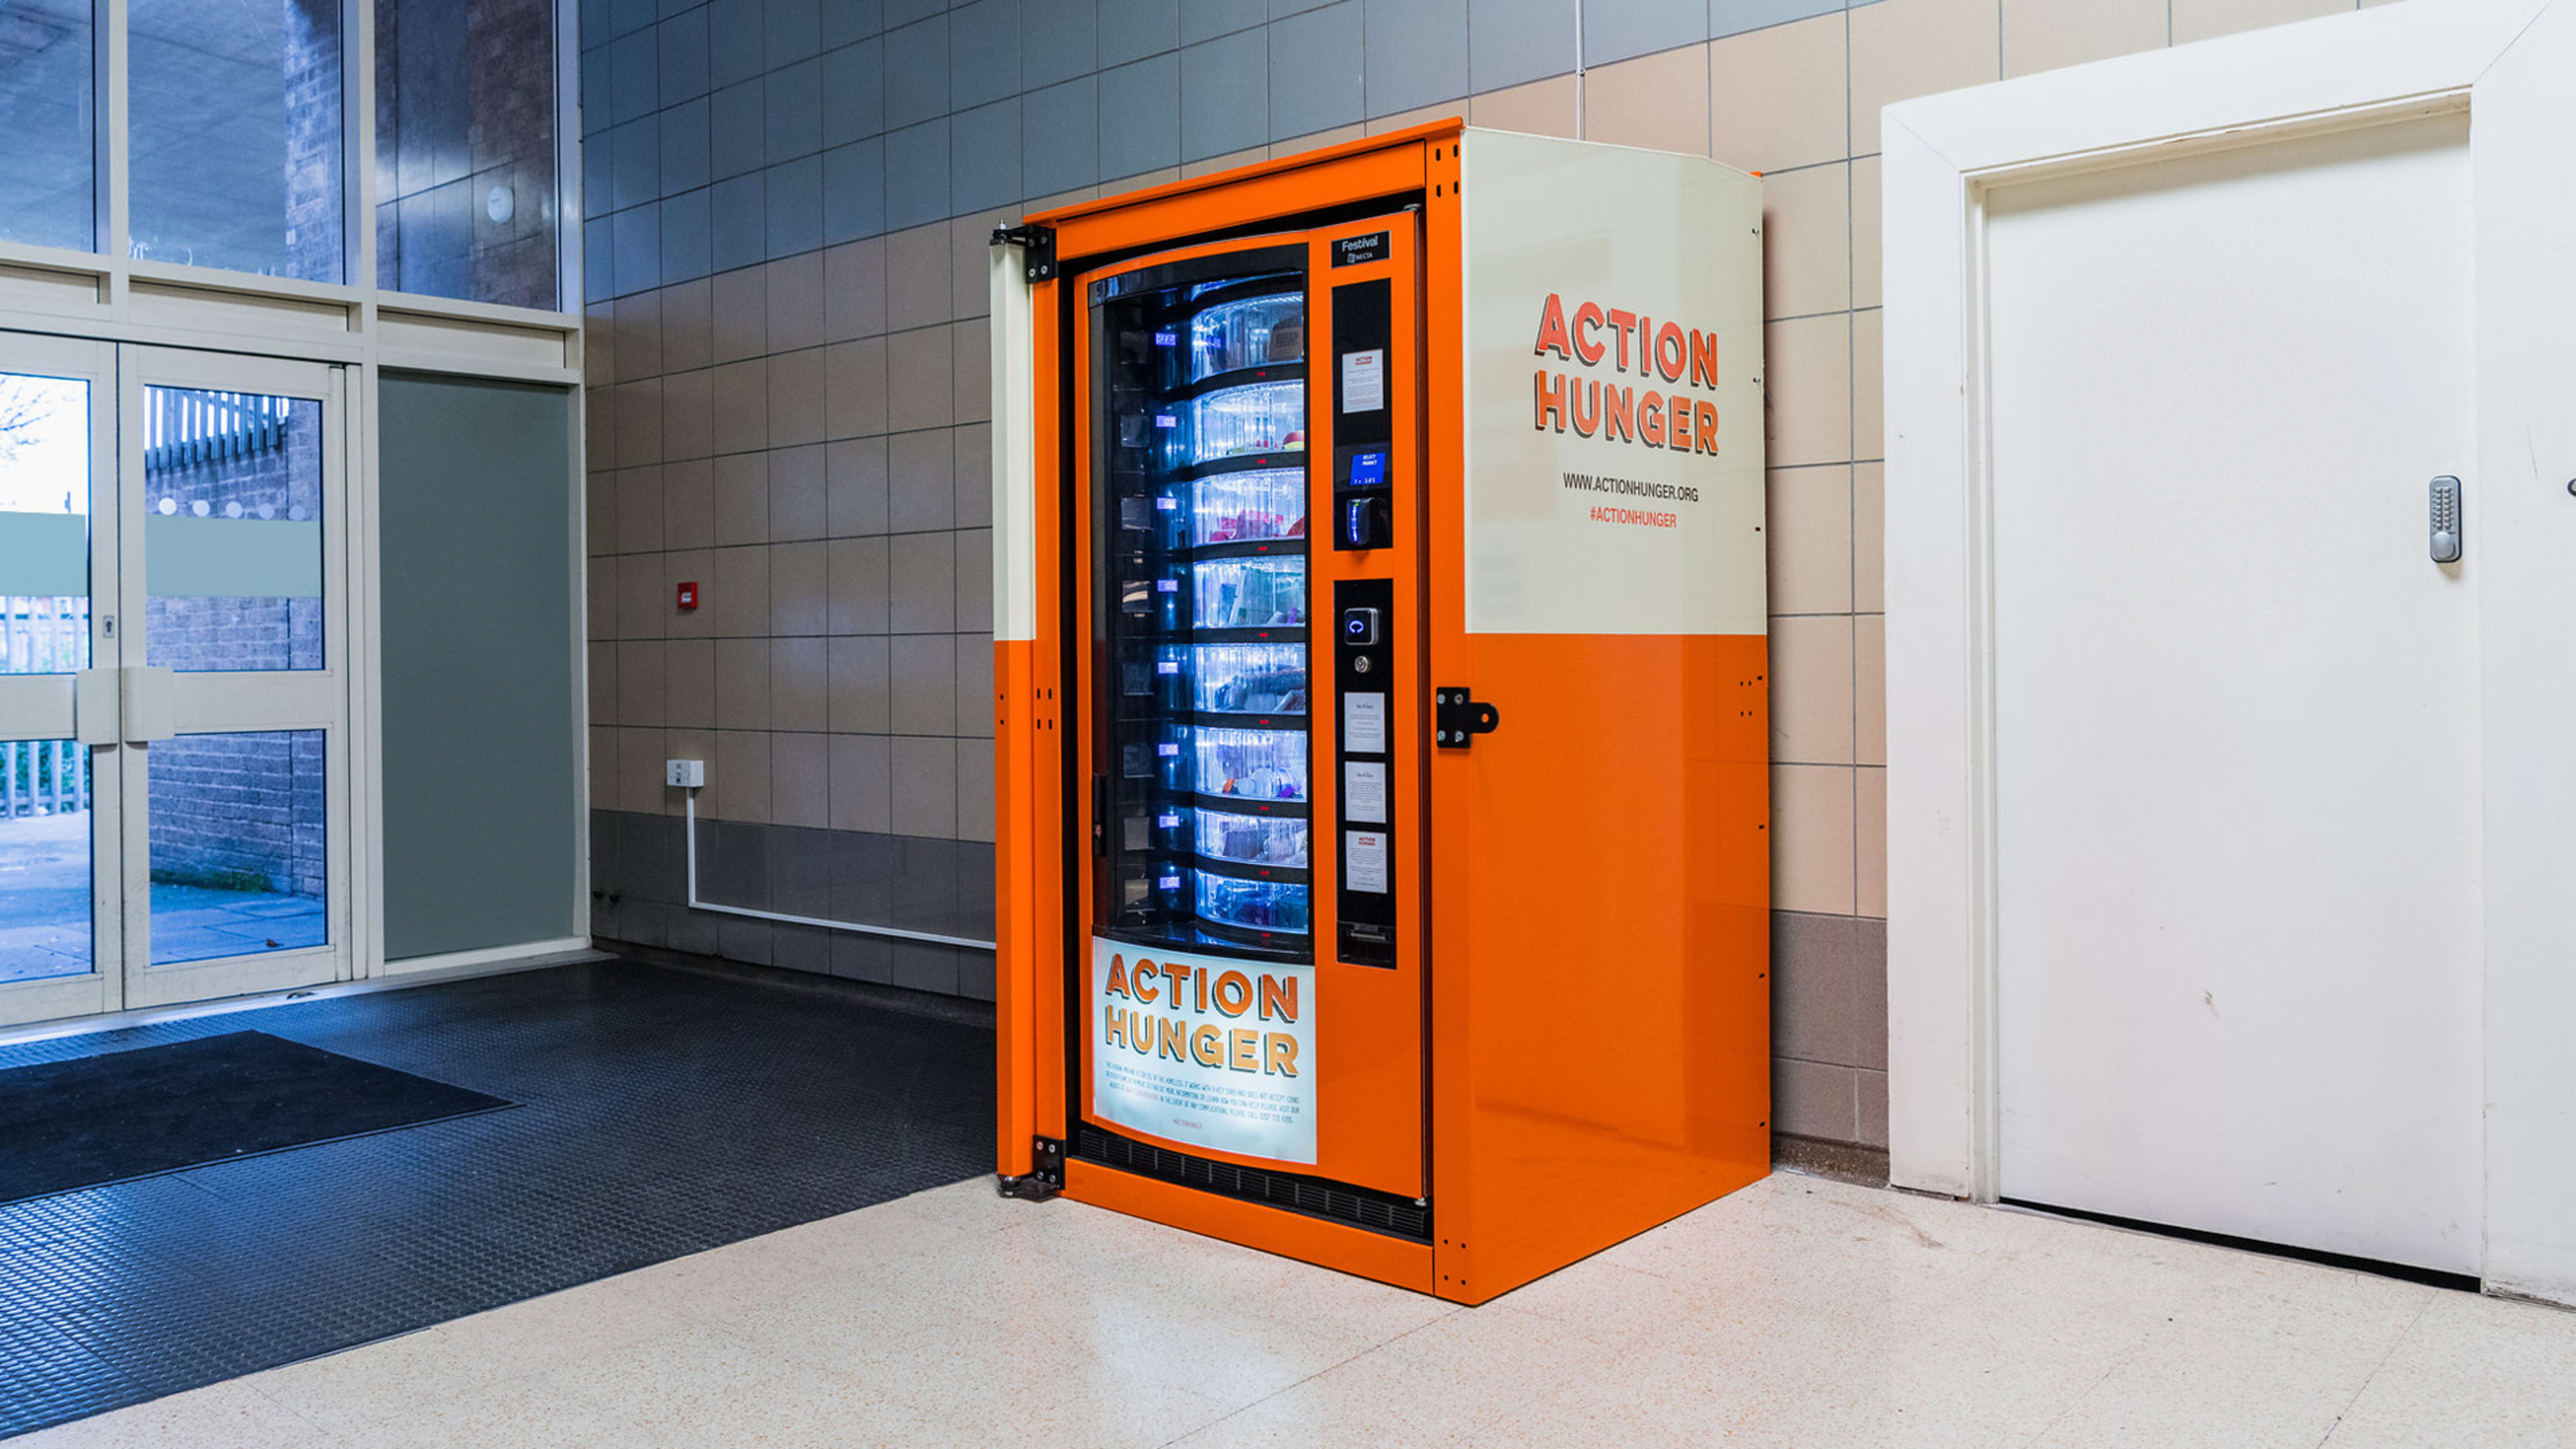 These Vending Machines Give The Homeless Free Food